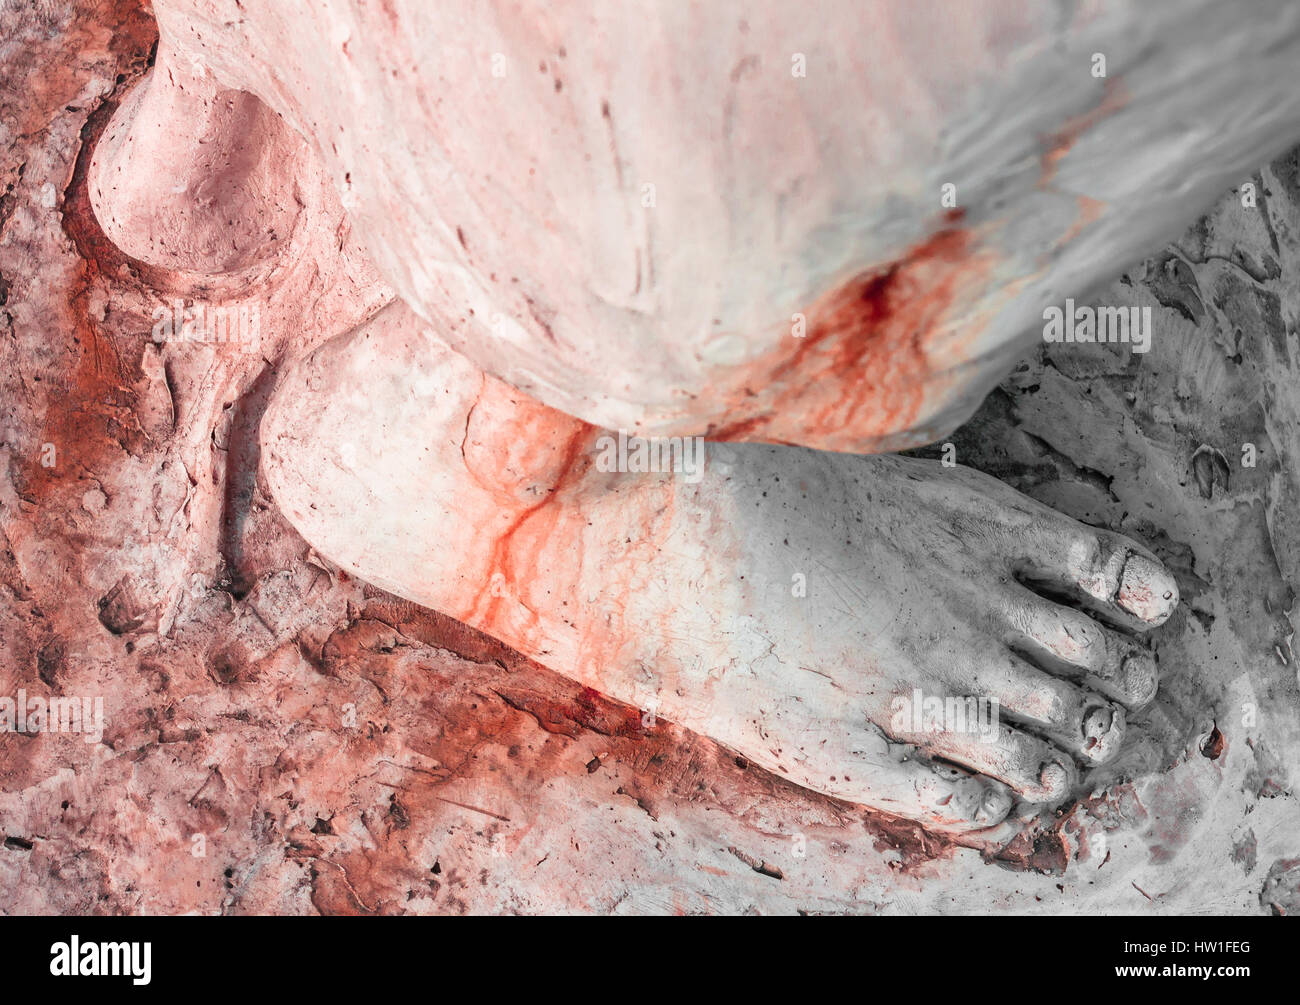 Extreme close-up of the feet of Jesus Christ bloodied. Top view. Shallow depth of field. Stock Photo